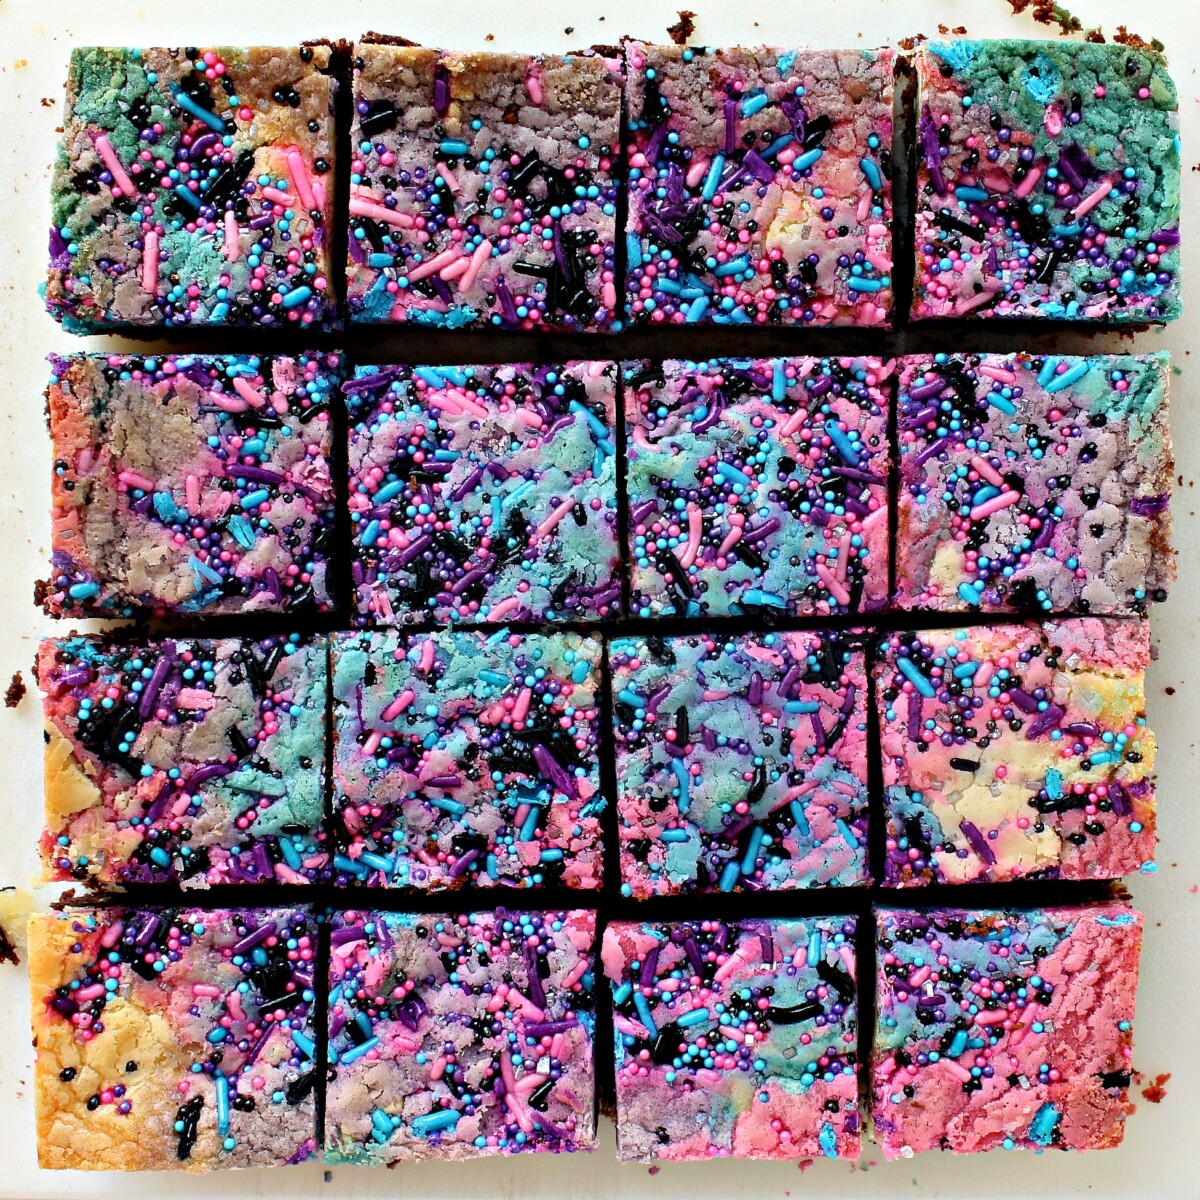 Galaxy Brownies topped with swirls of pink, blue and purple, cut into squares.